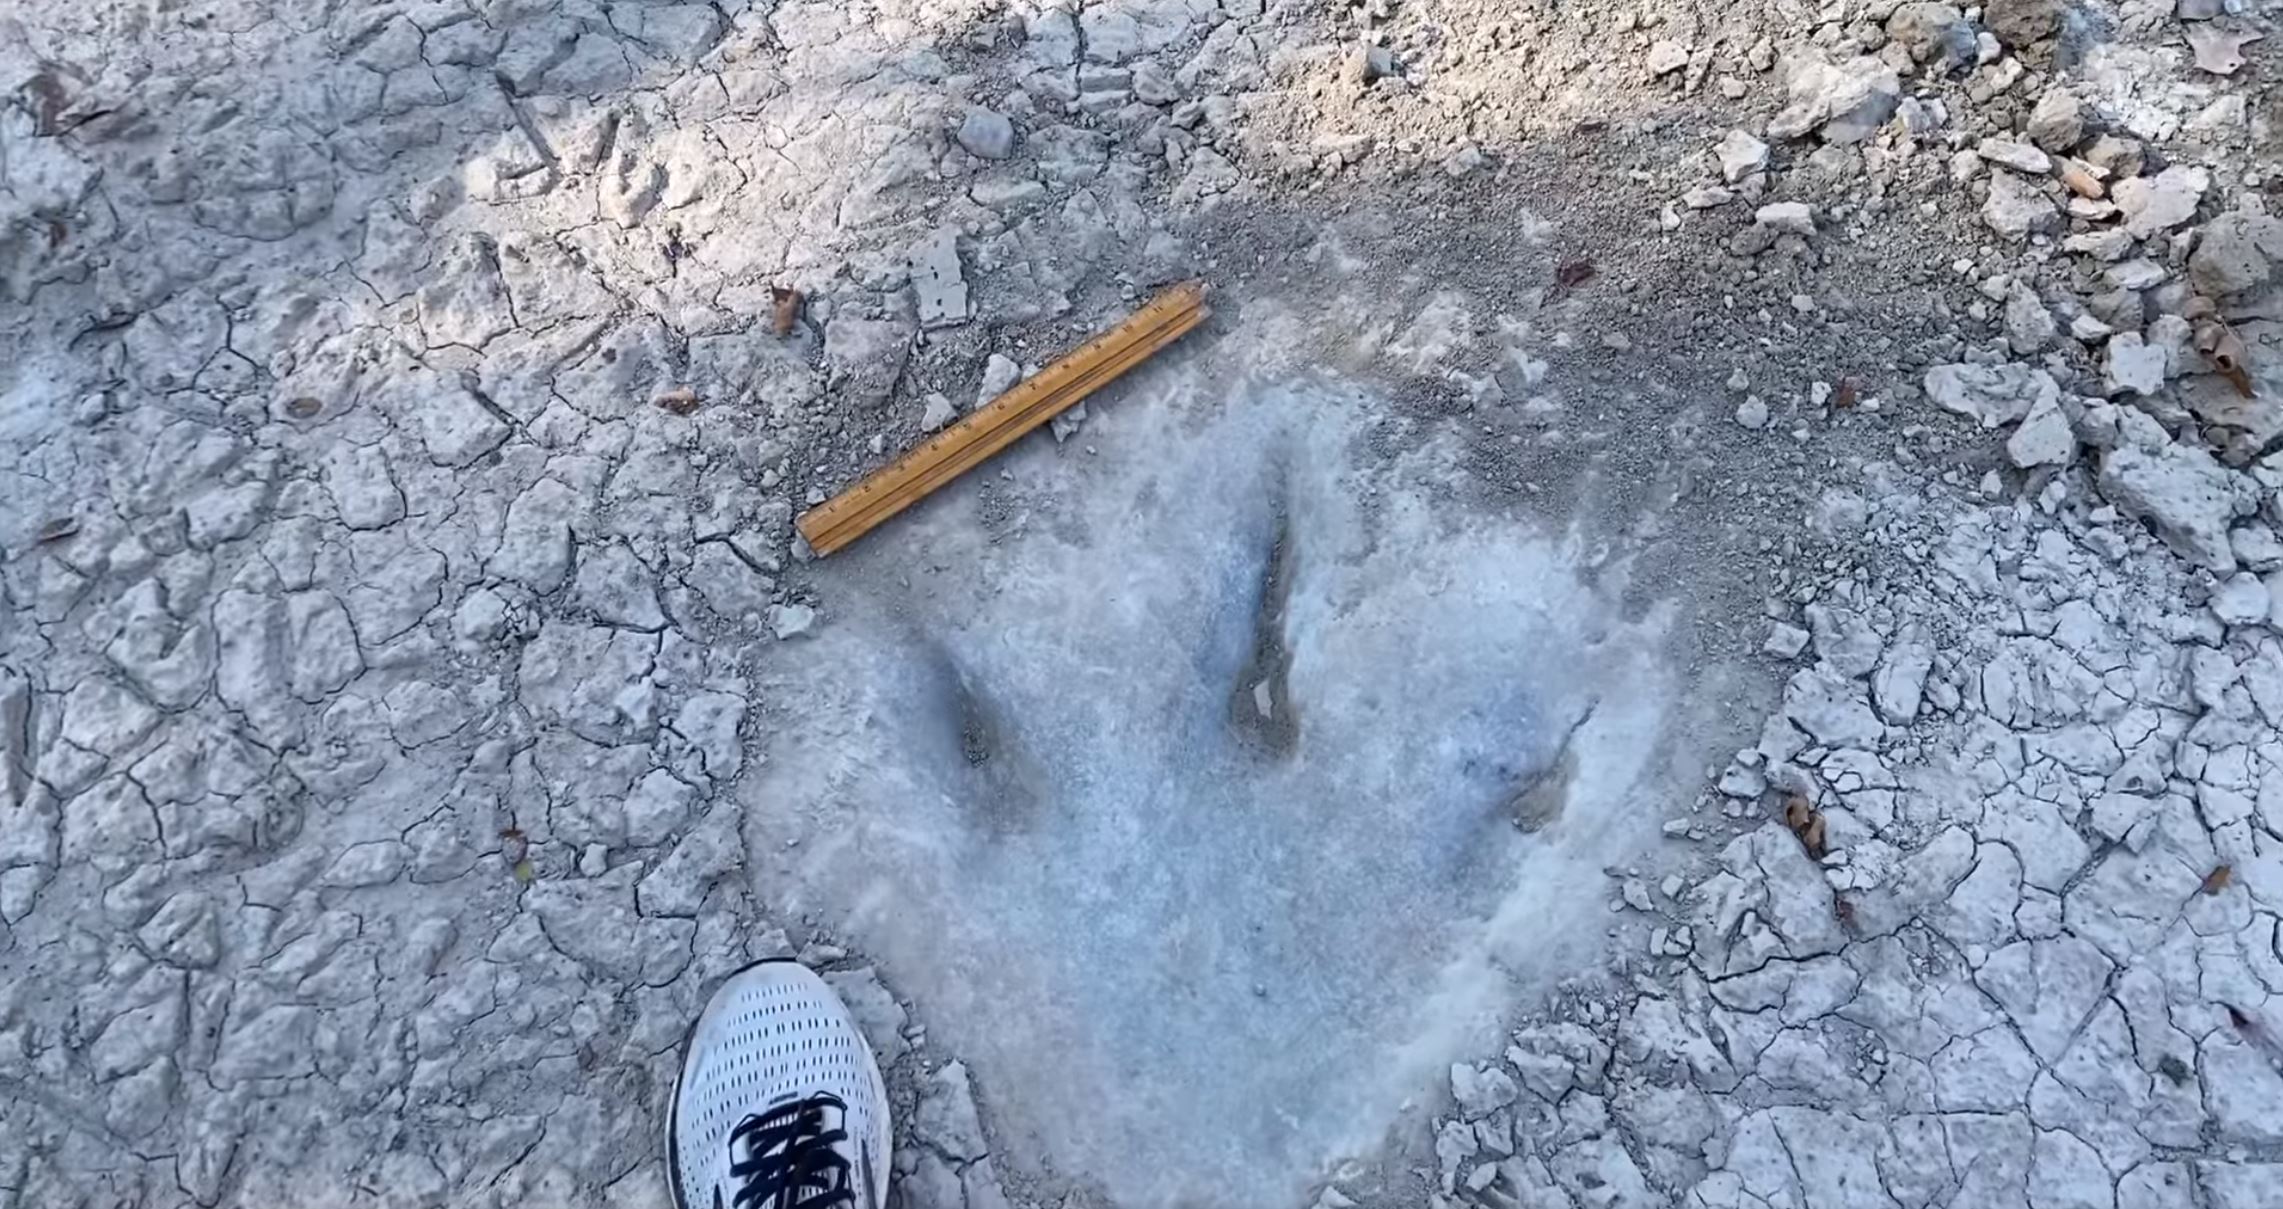 A screenshot from the video showing the massive Dinosaur Tracks. Image Credit: Dinosaur Valley State Park - Friends.